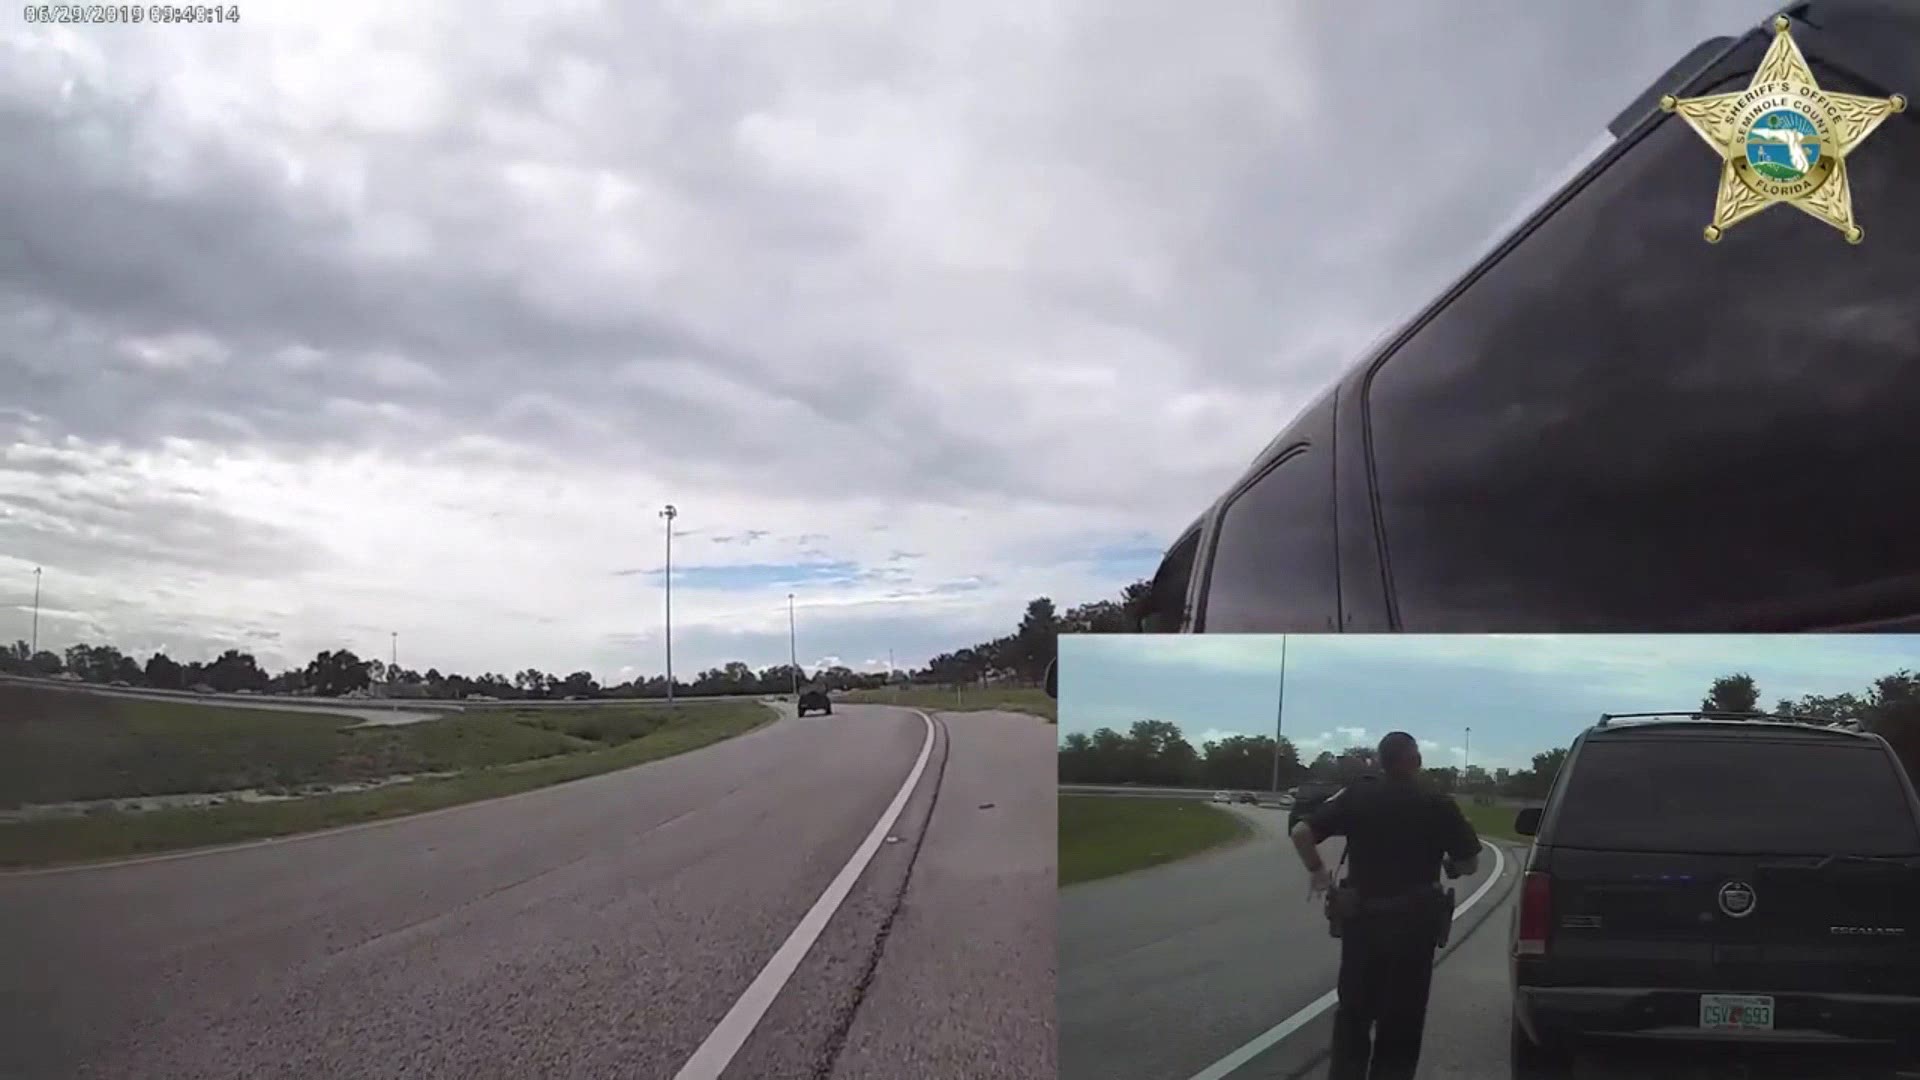 Seminole County Sheriff's Office in Florida shared bodycam video of a police officer, Deputy Blais’s traffic stop on Saturday. It was a routine traffic stop that quickly turned violent. The deputy was dragged on Heathrow/Lake Mary at I-4 and 46A. Deputy Blais was treated and released for non-life threatening injuries. The suspect was apprehended later that afternoon.